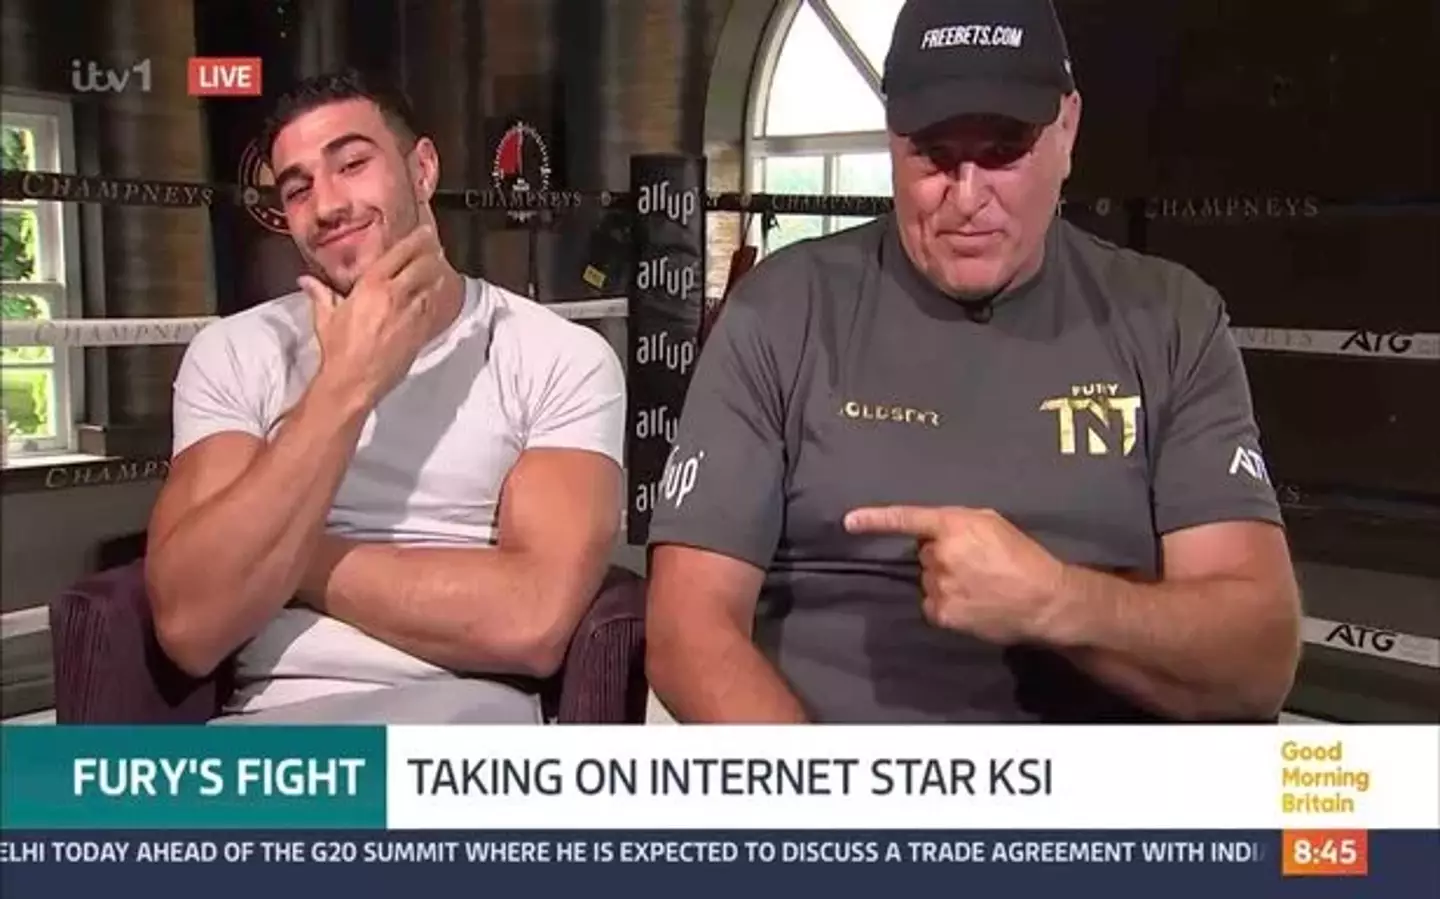 Fury appeared on Good Morning Britain to discuss the fight.